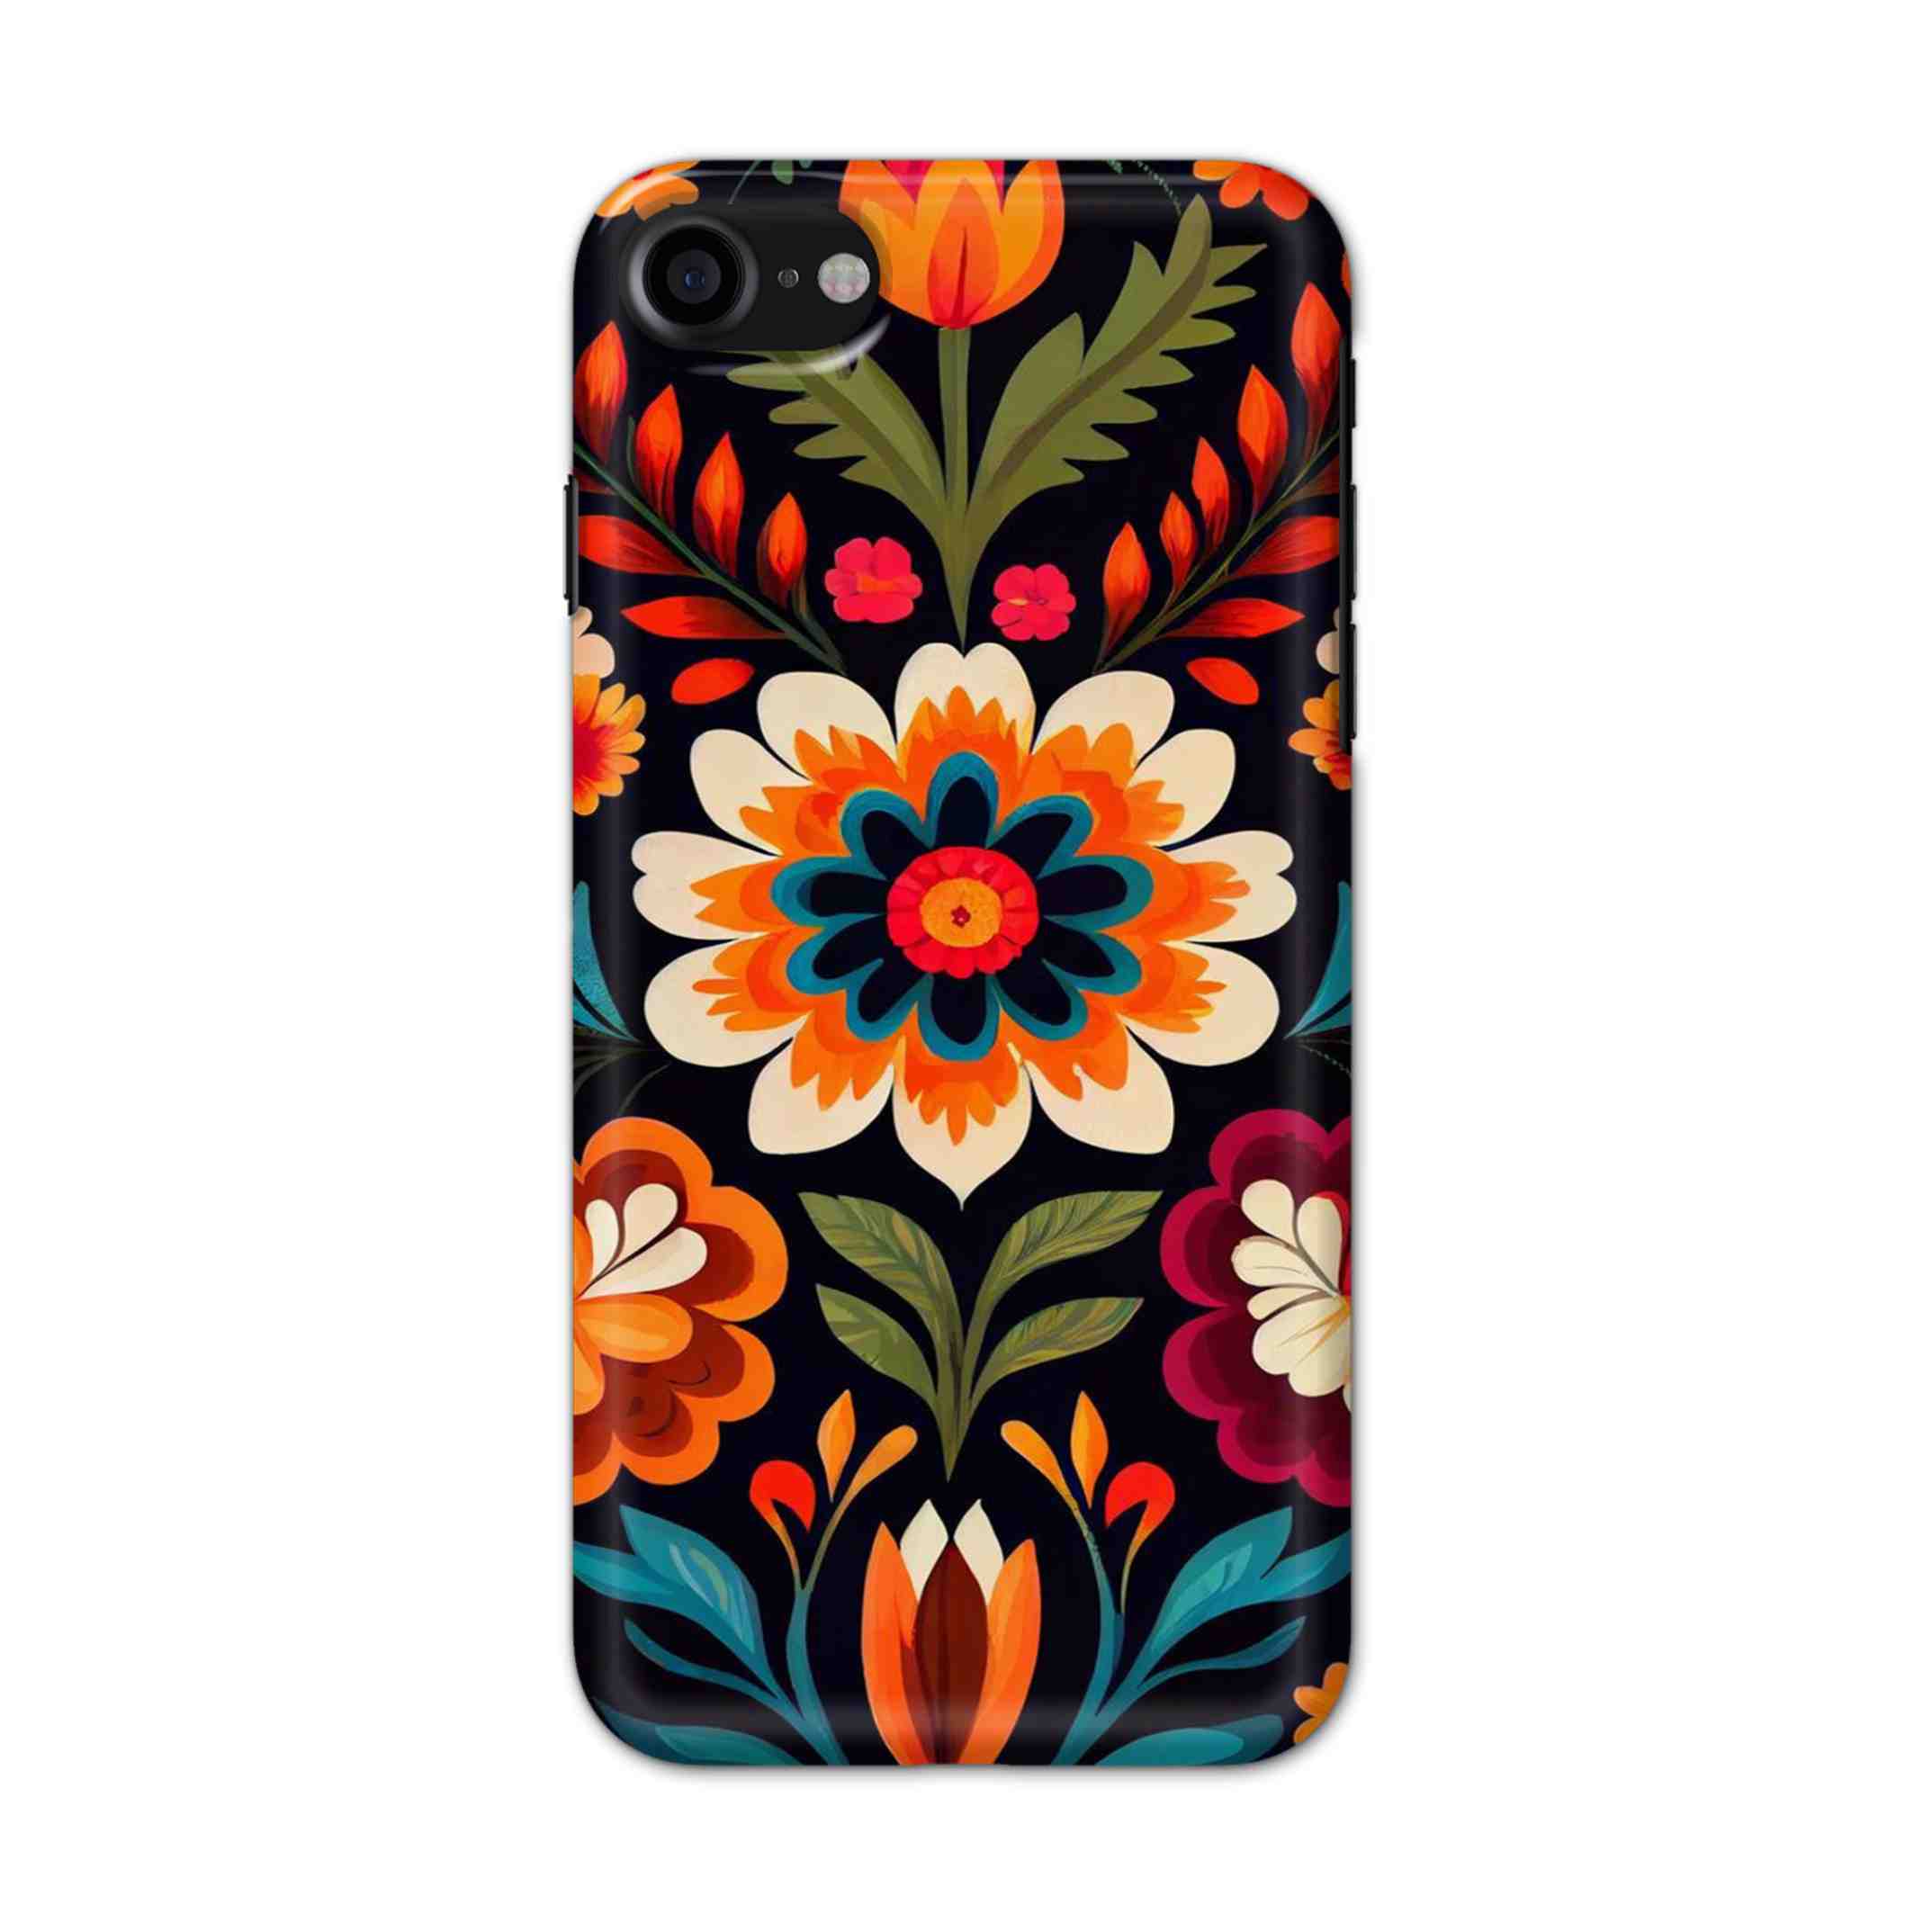 Buy Flower Hard Back Mobile Phone Case/Cover For iPhone 7 / 8 Online